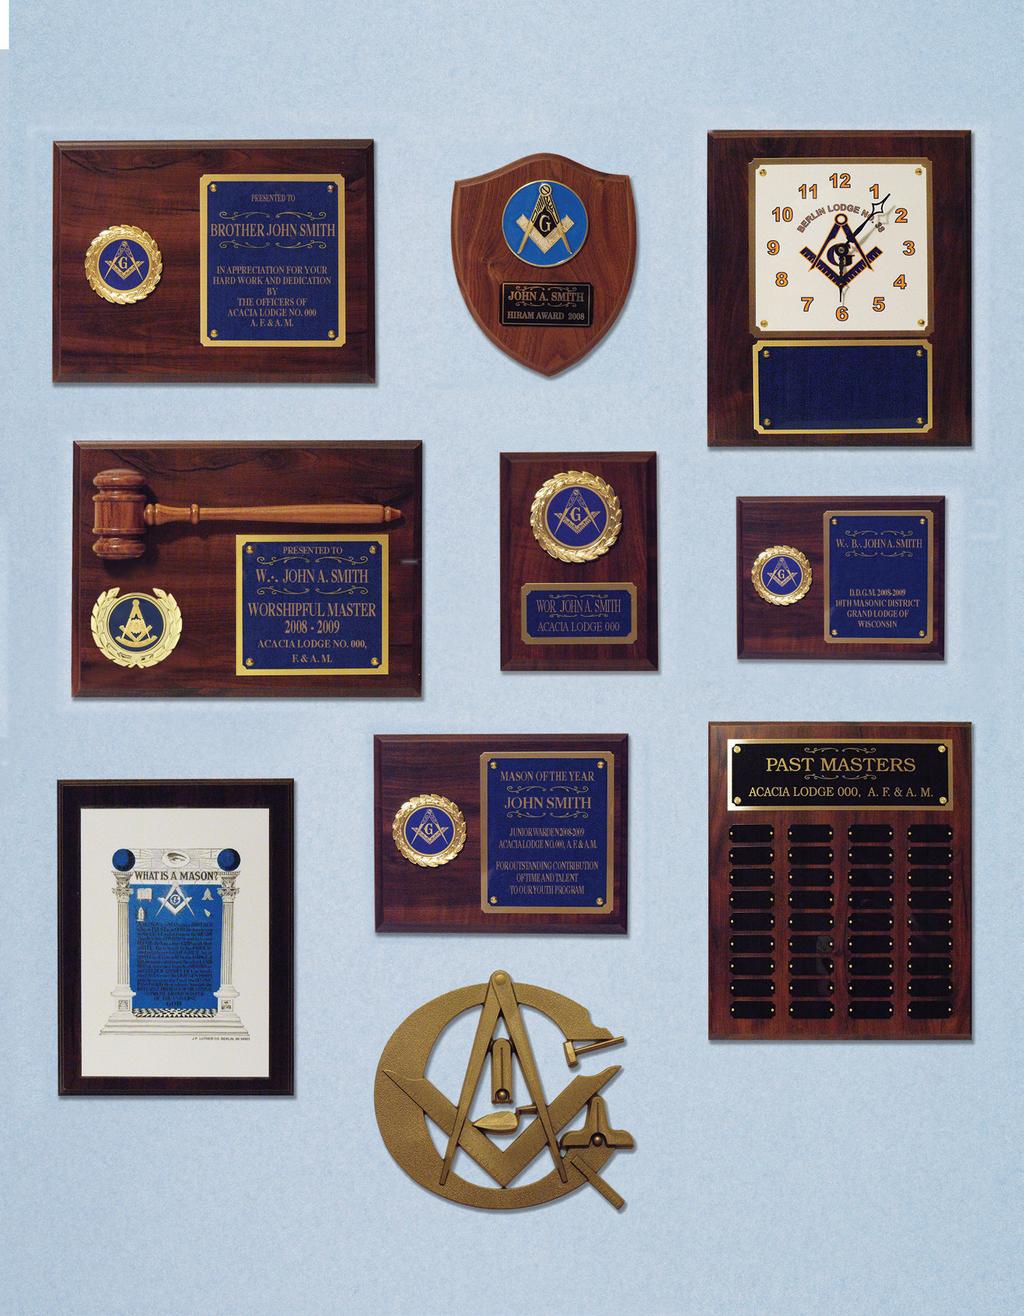 WALNUT FINISH AWARD PLAQUES Specify choice of emblem Allow two weeks for delivery Engraving at 20 cents per character No. P-9012 9" x 12" $40.00 No. L-1546 7 x 6 Shield $17.00 No. P-C912 9" x 12" Clock Plaque $54.